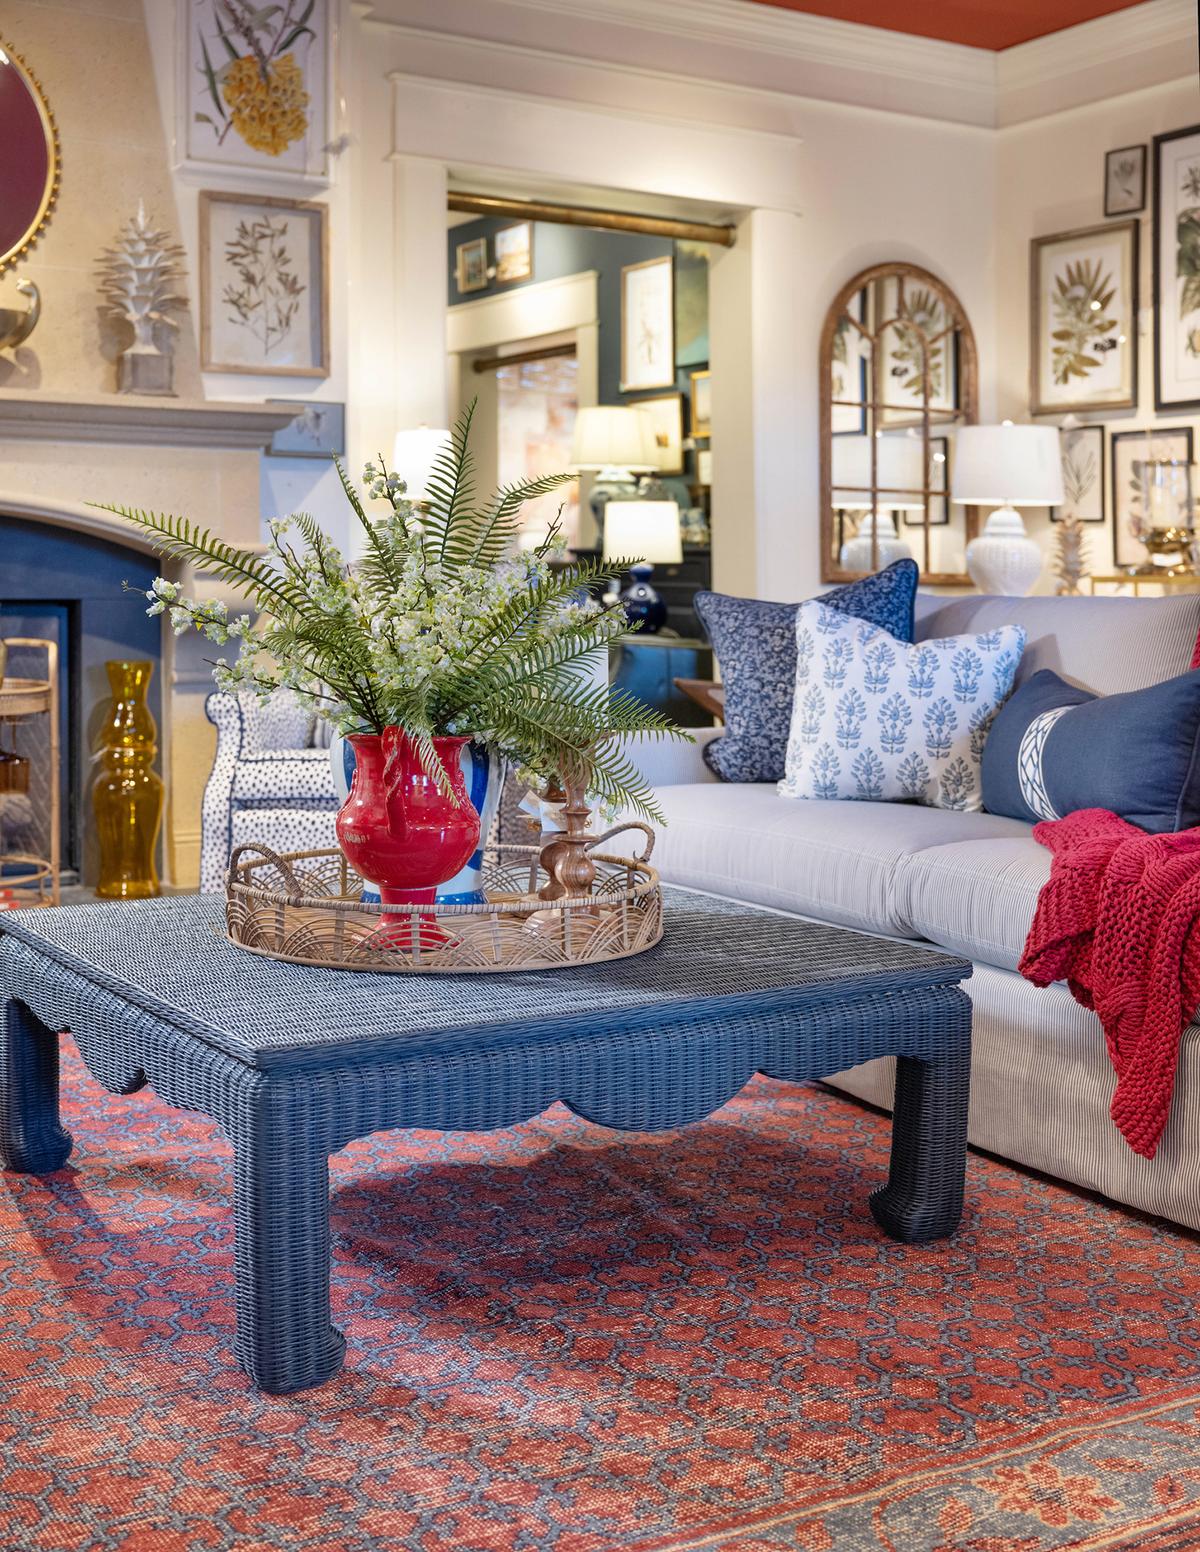 A wicker coffee table is reimagined with a scrolled silhouette and deep blue color. (Handout/TNS)